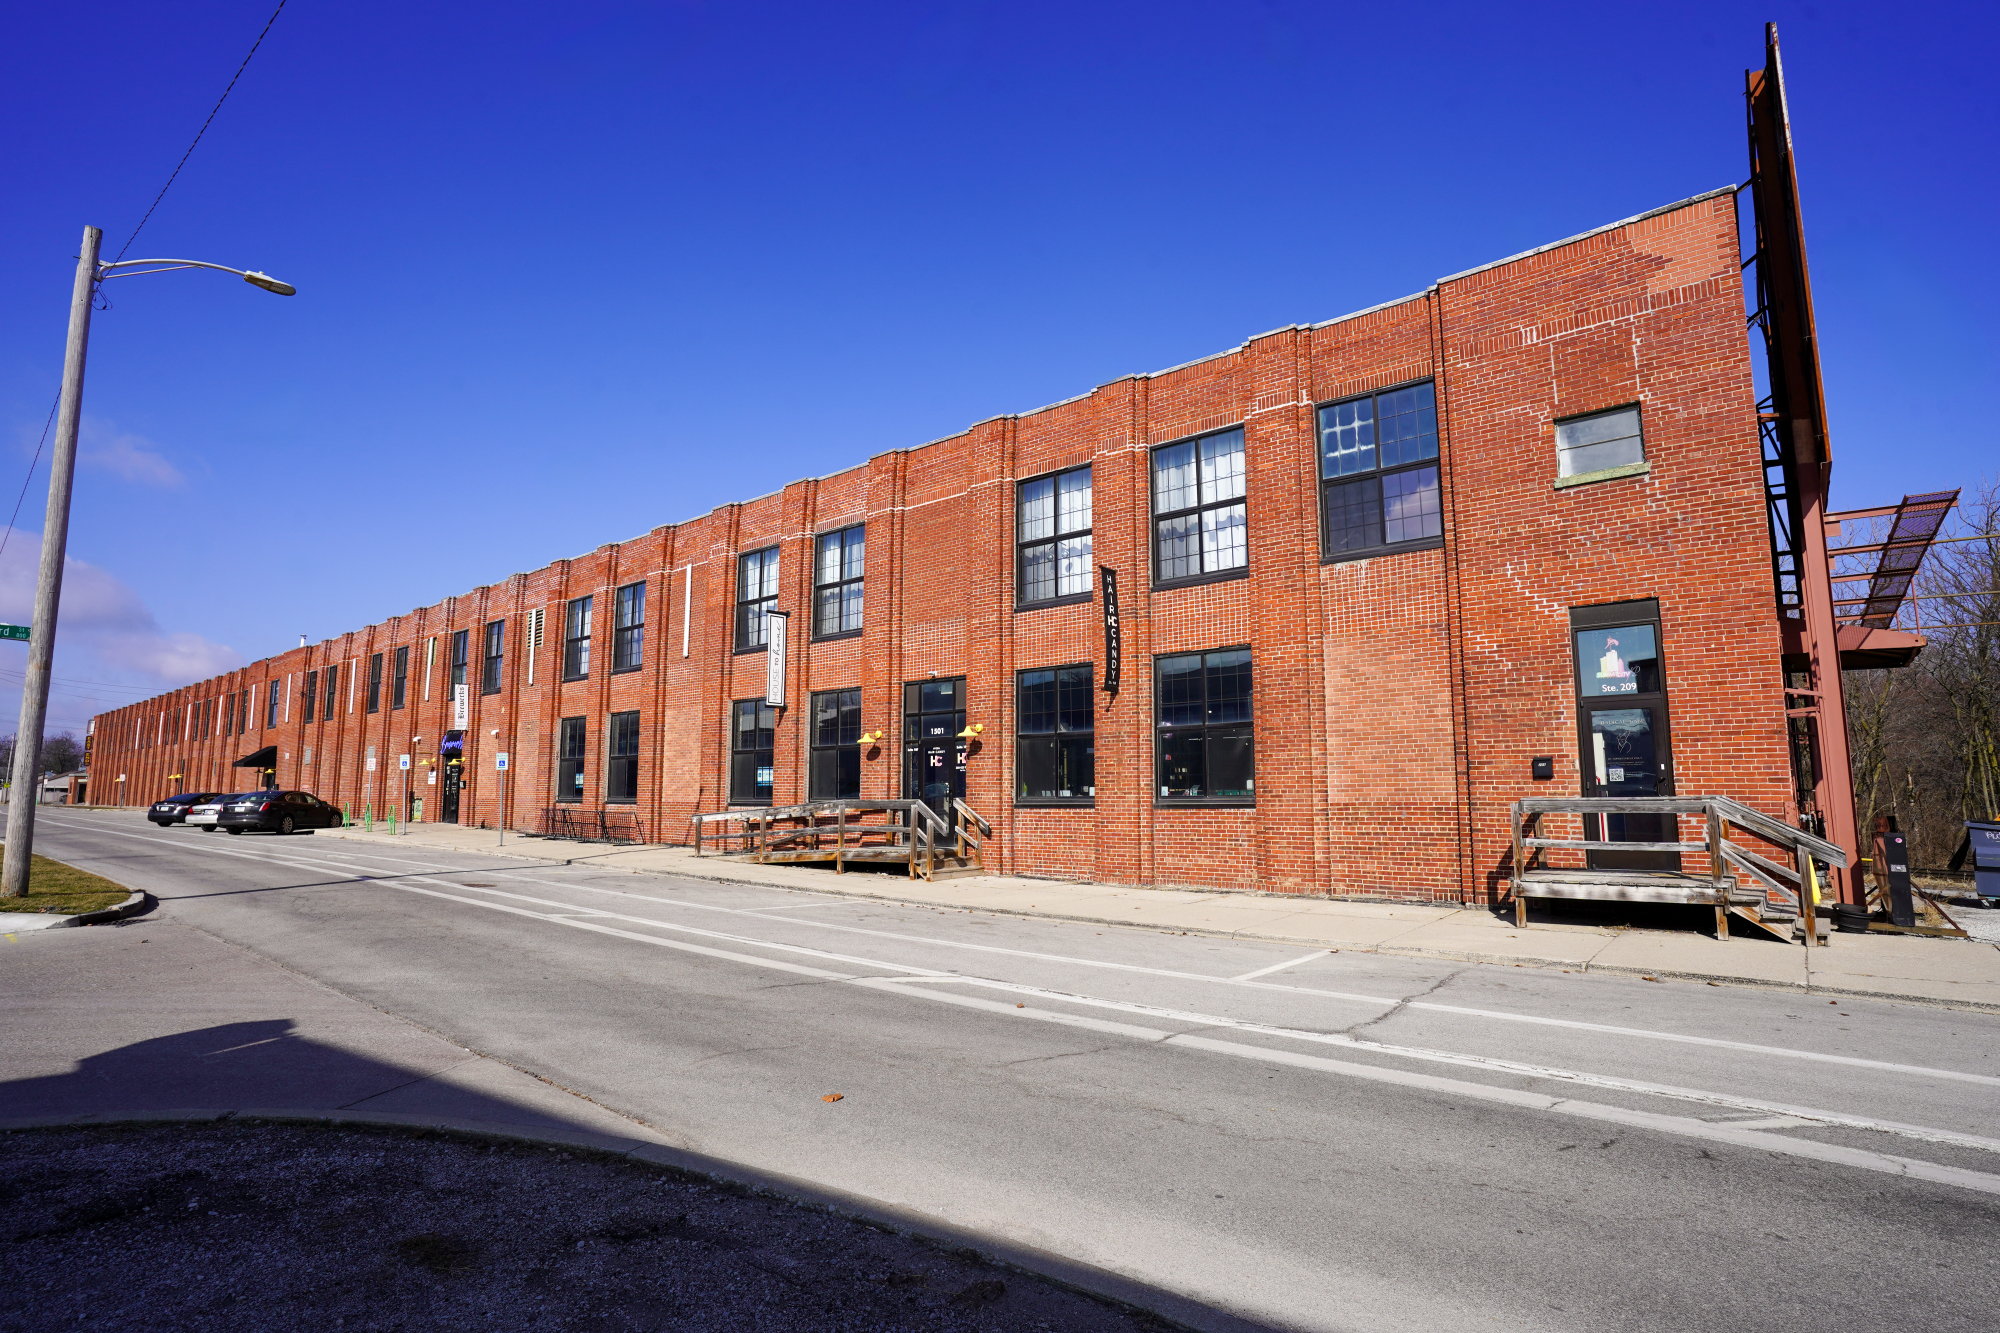 Sturges Property Group- Olde East End Historic Building For Lease